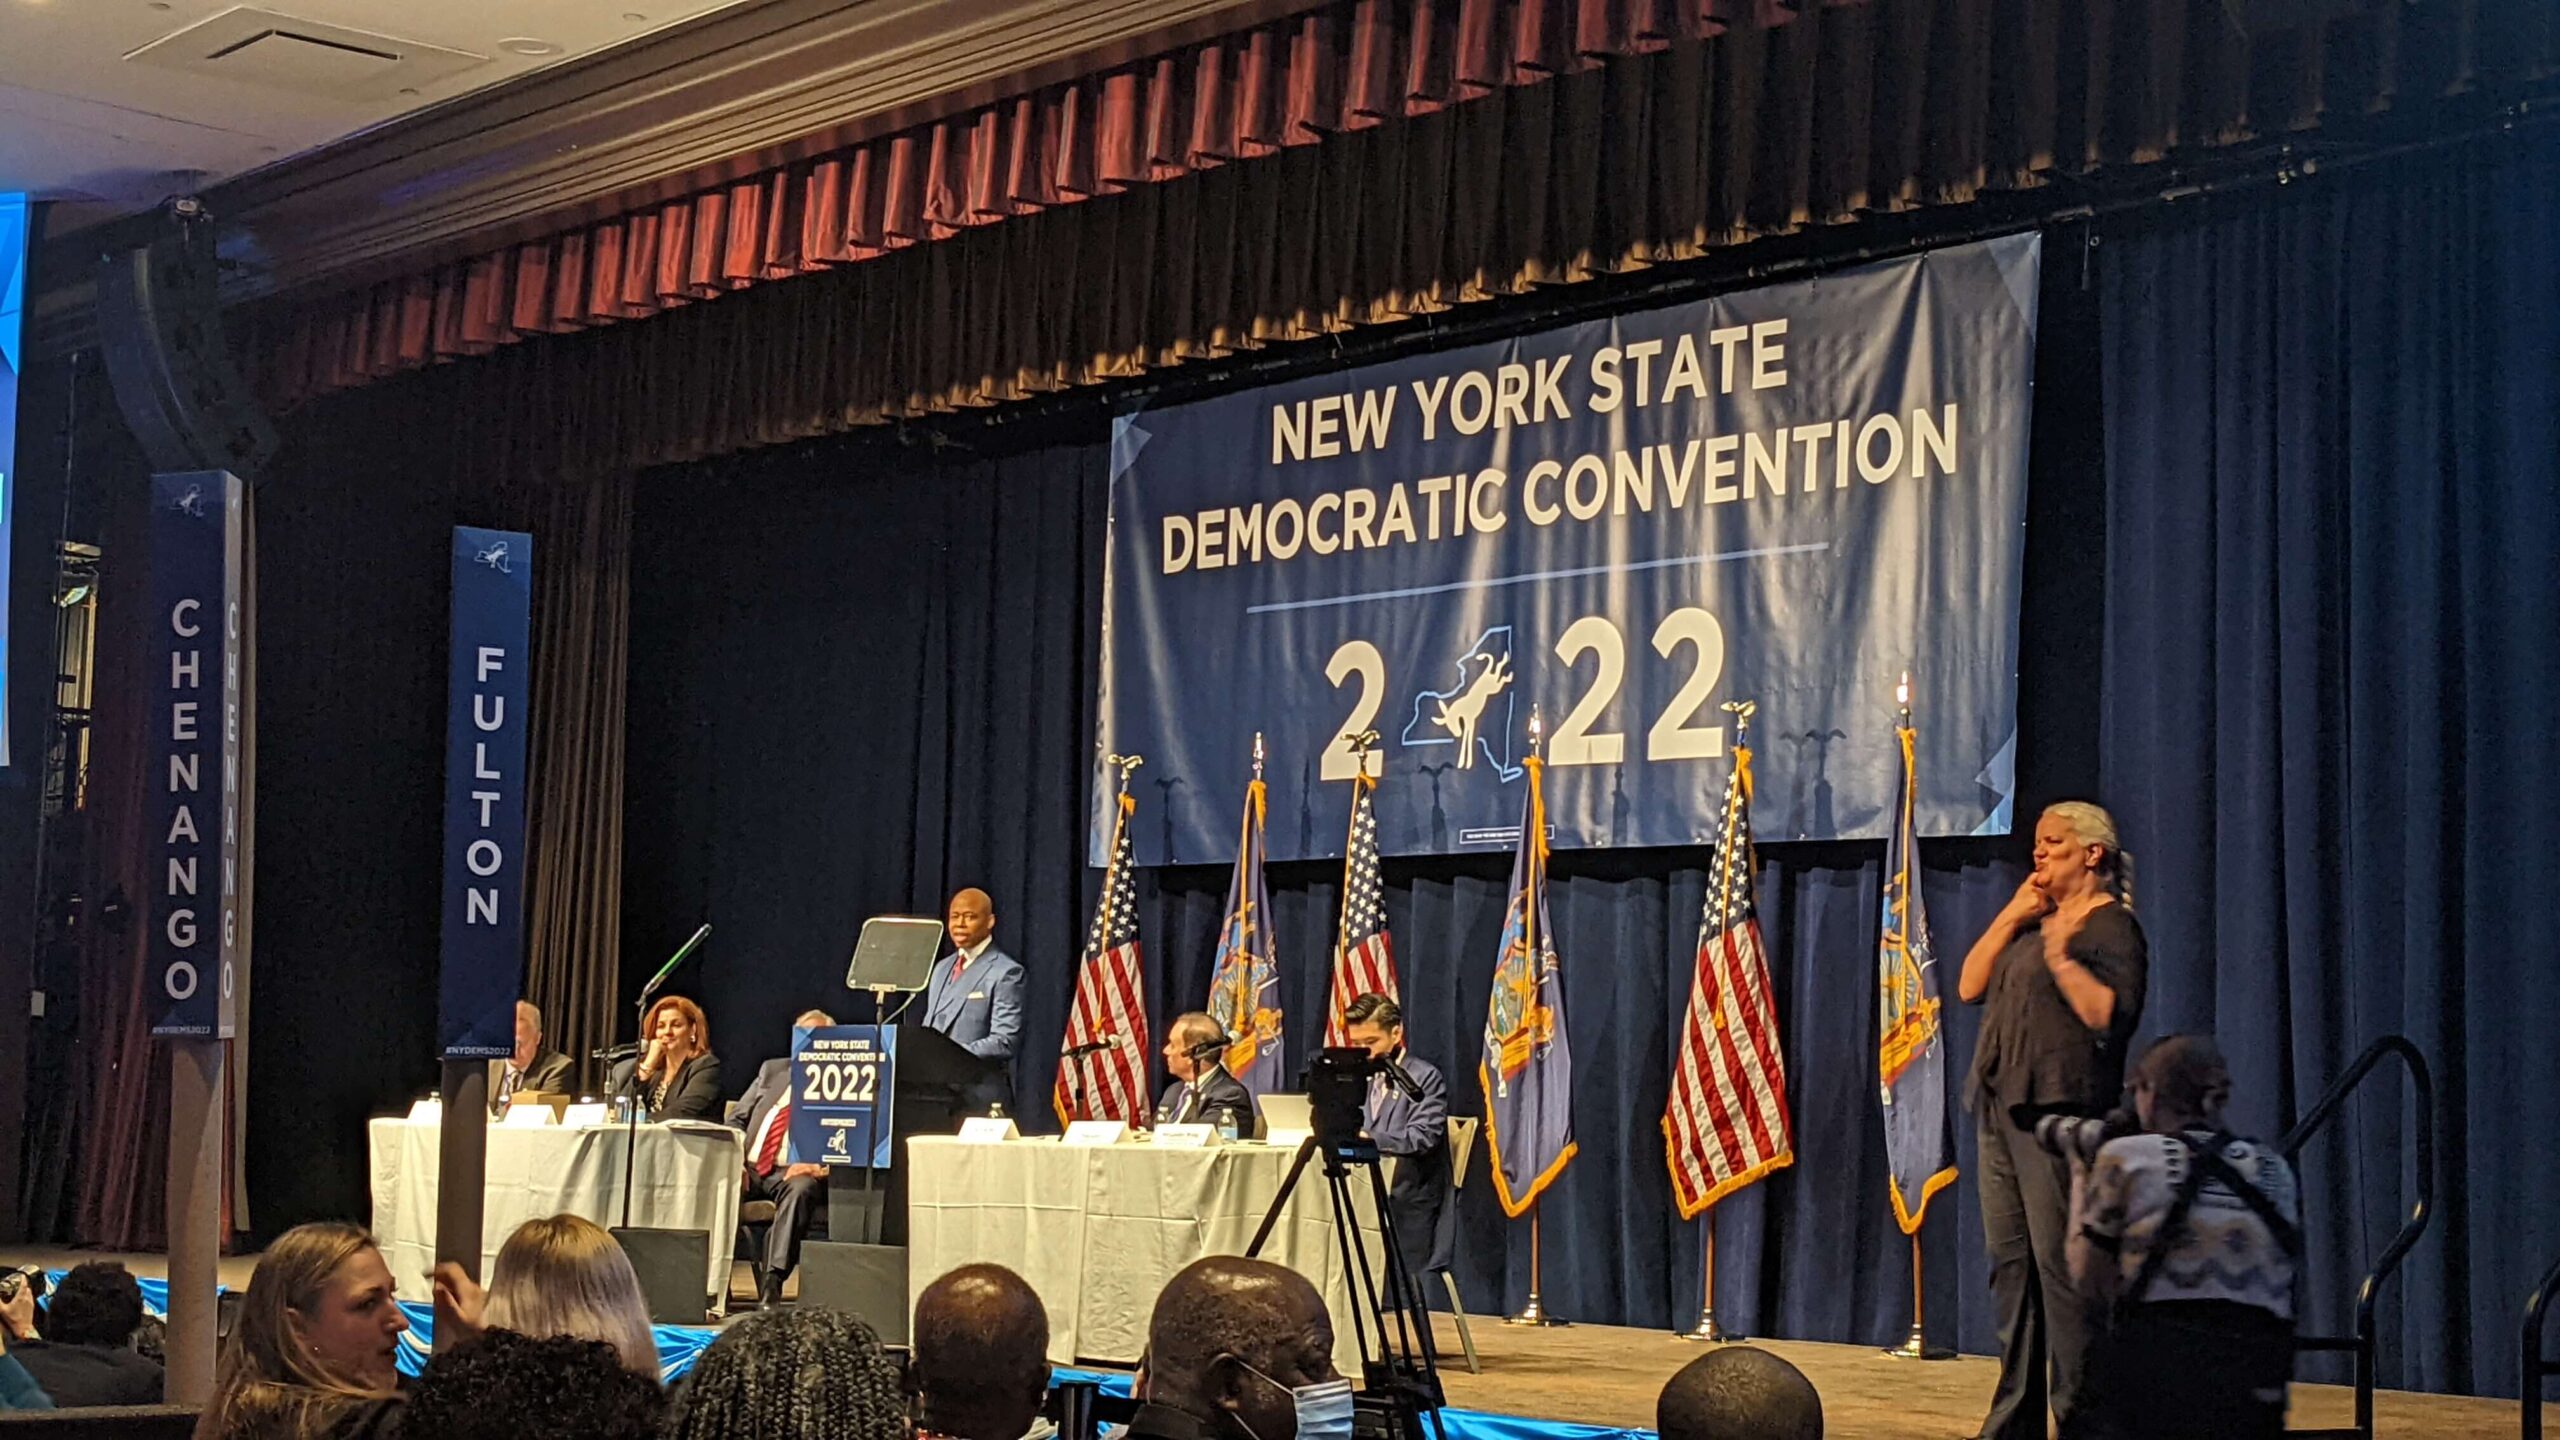 New York State Democratic Convention